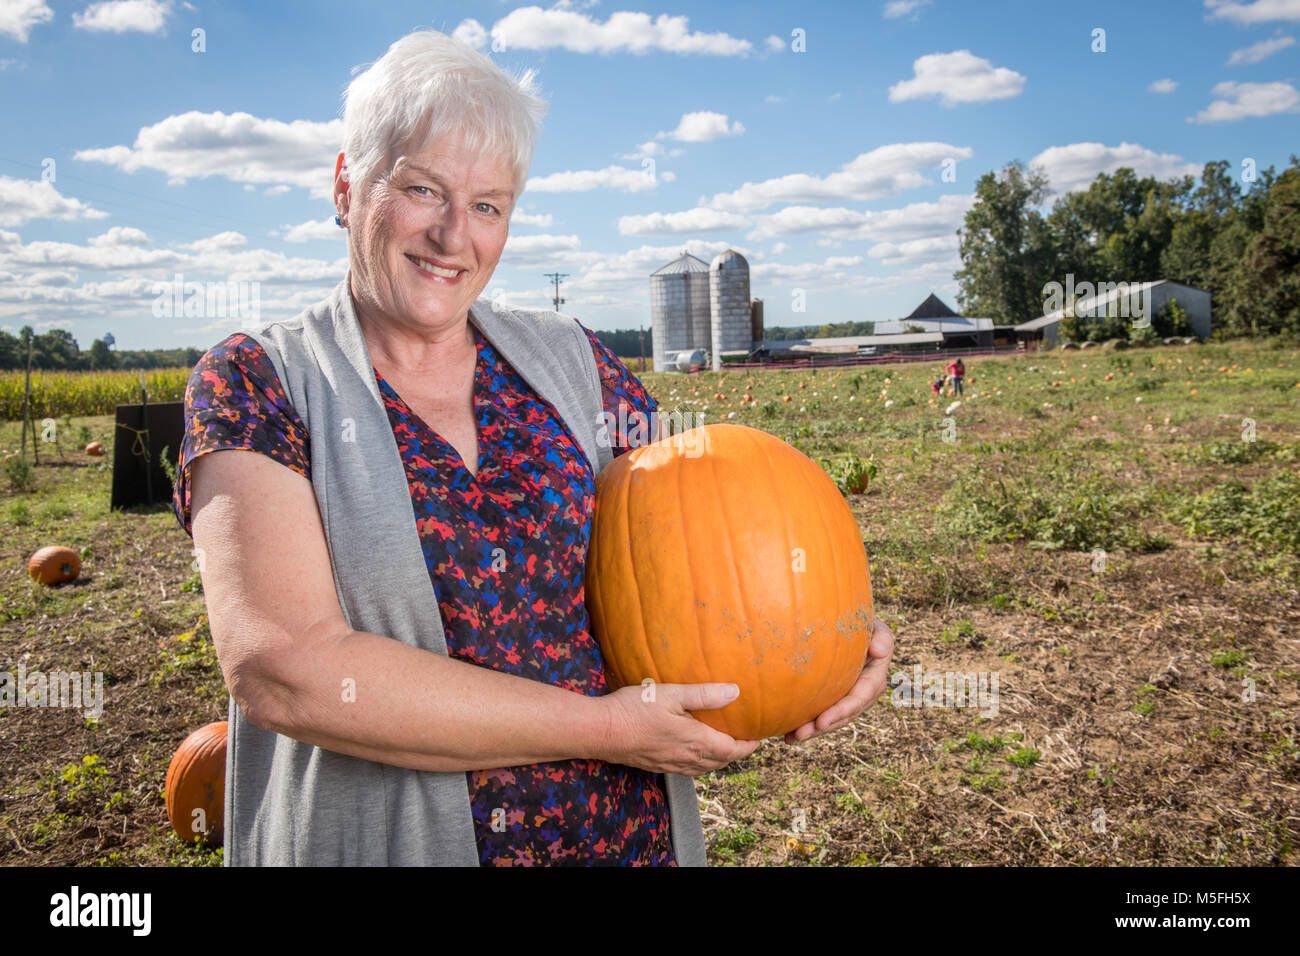 Female farmer smiles while holding a pumpkin in pumpkin patch, Prince Frederick, Maryland Stock Photo